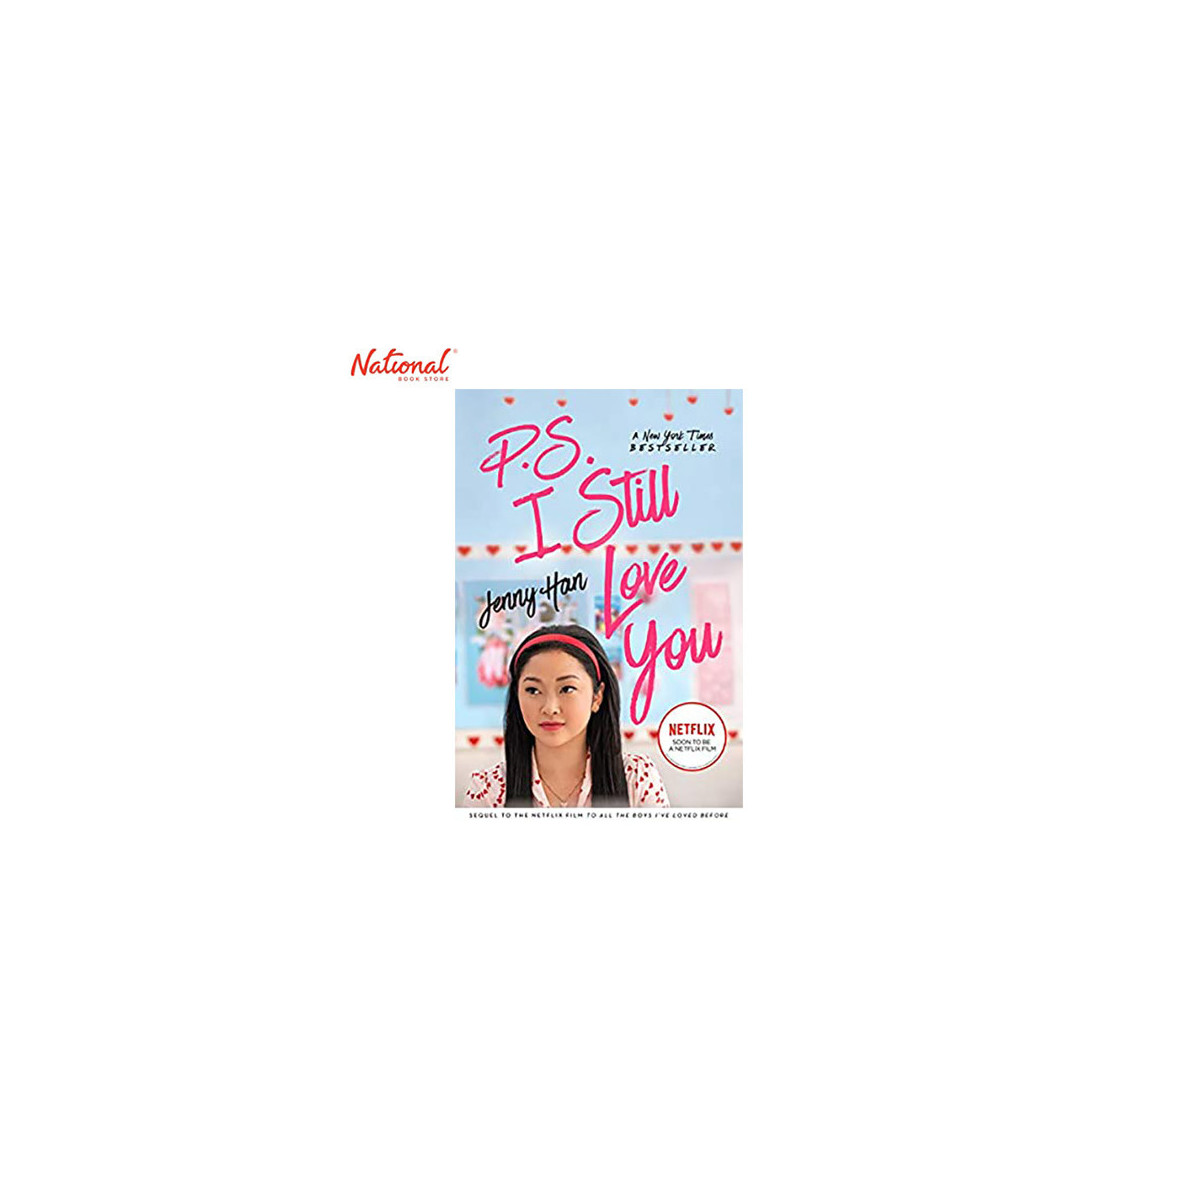 P.S. I STILL LOVE YOU: TO ALL THE BOYS I'VE LOVED BEFORE BOOK 2